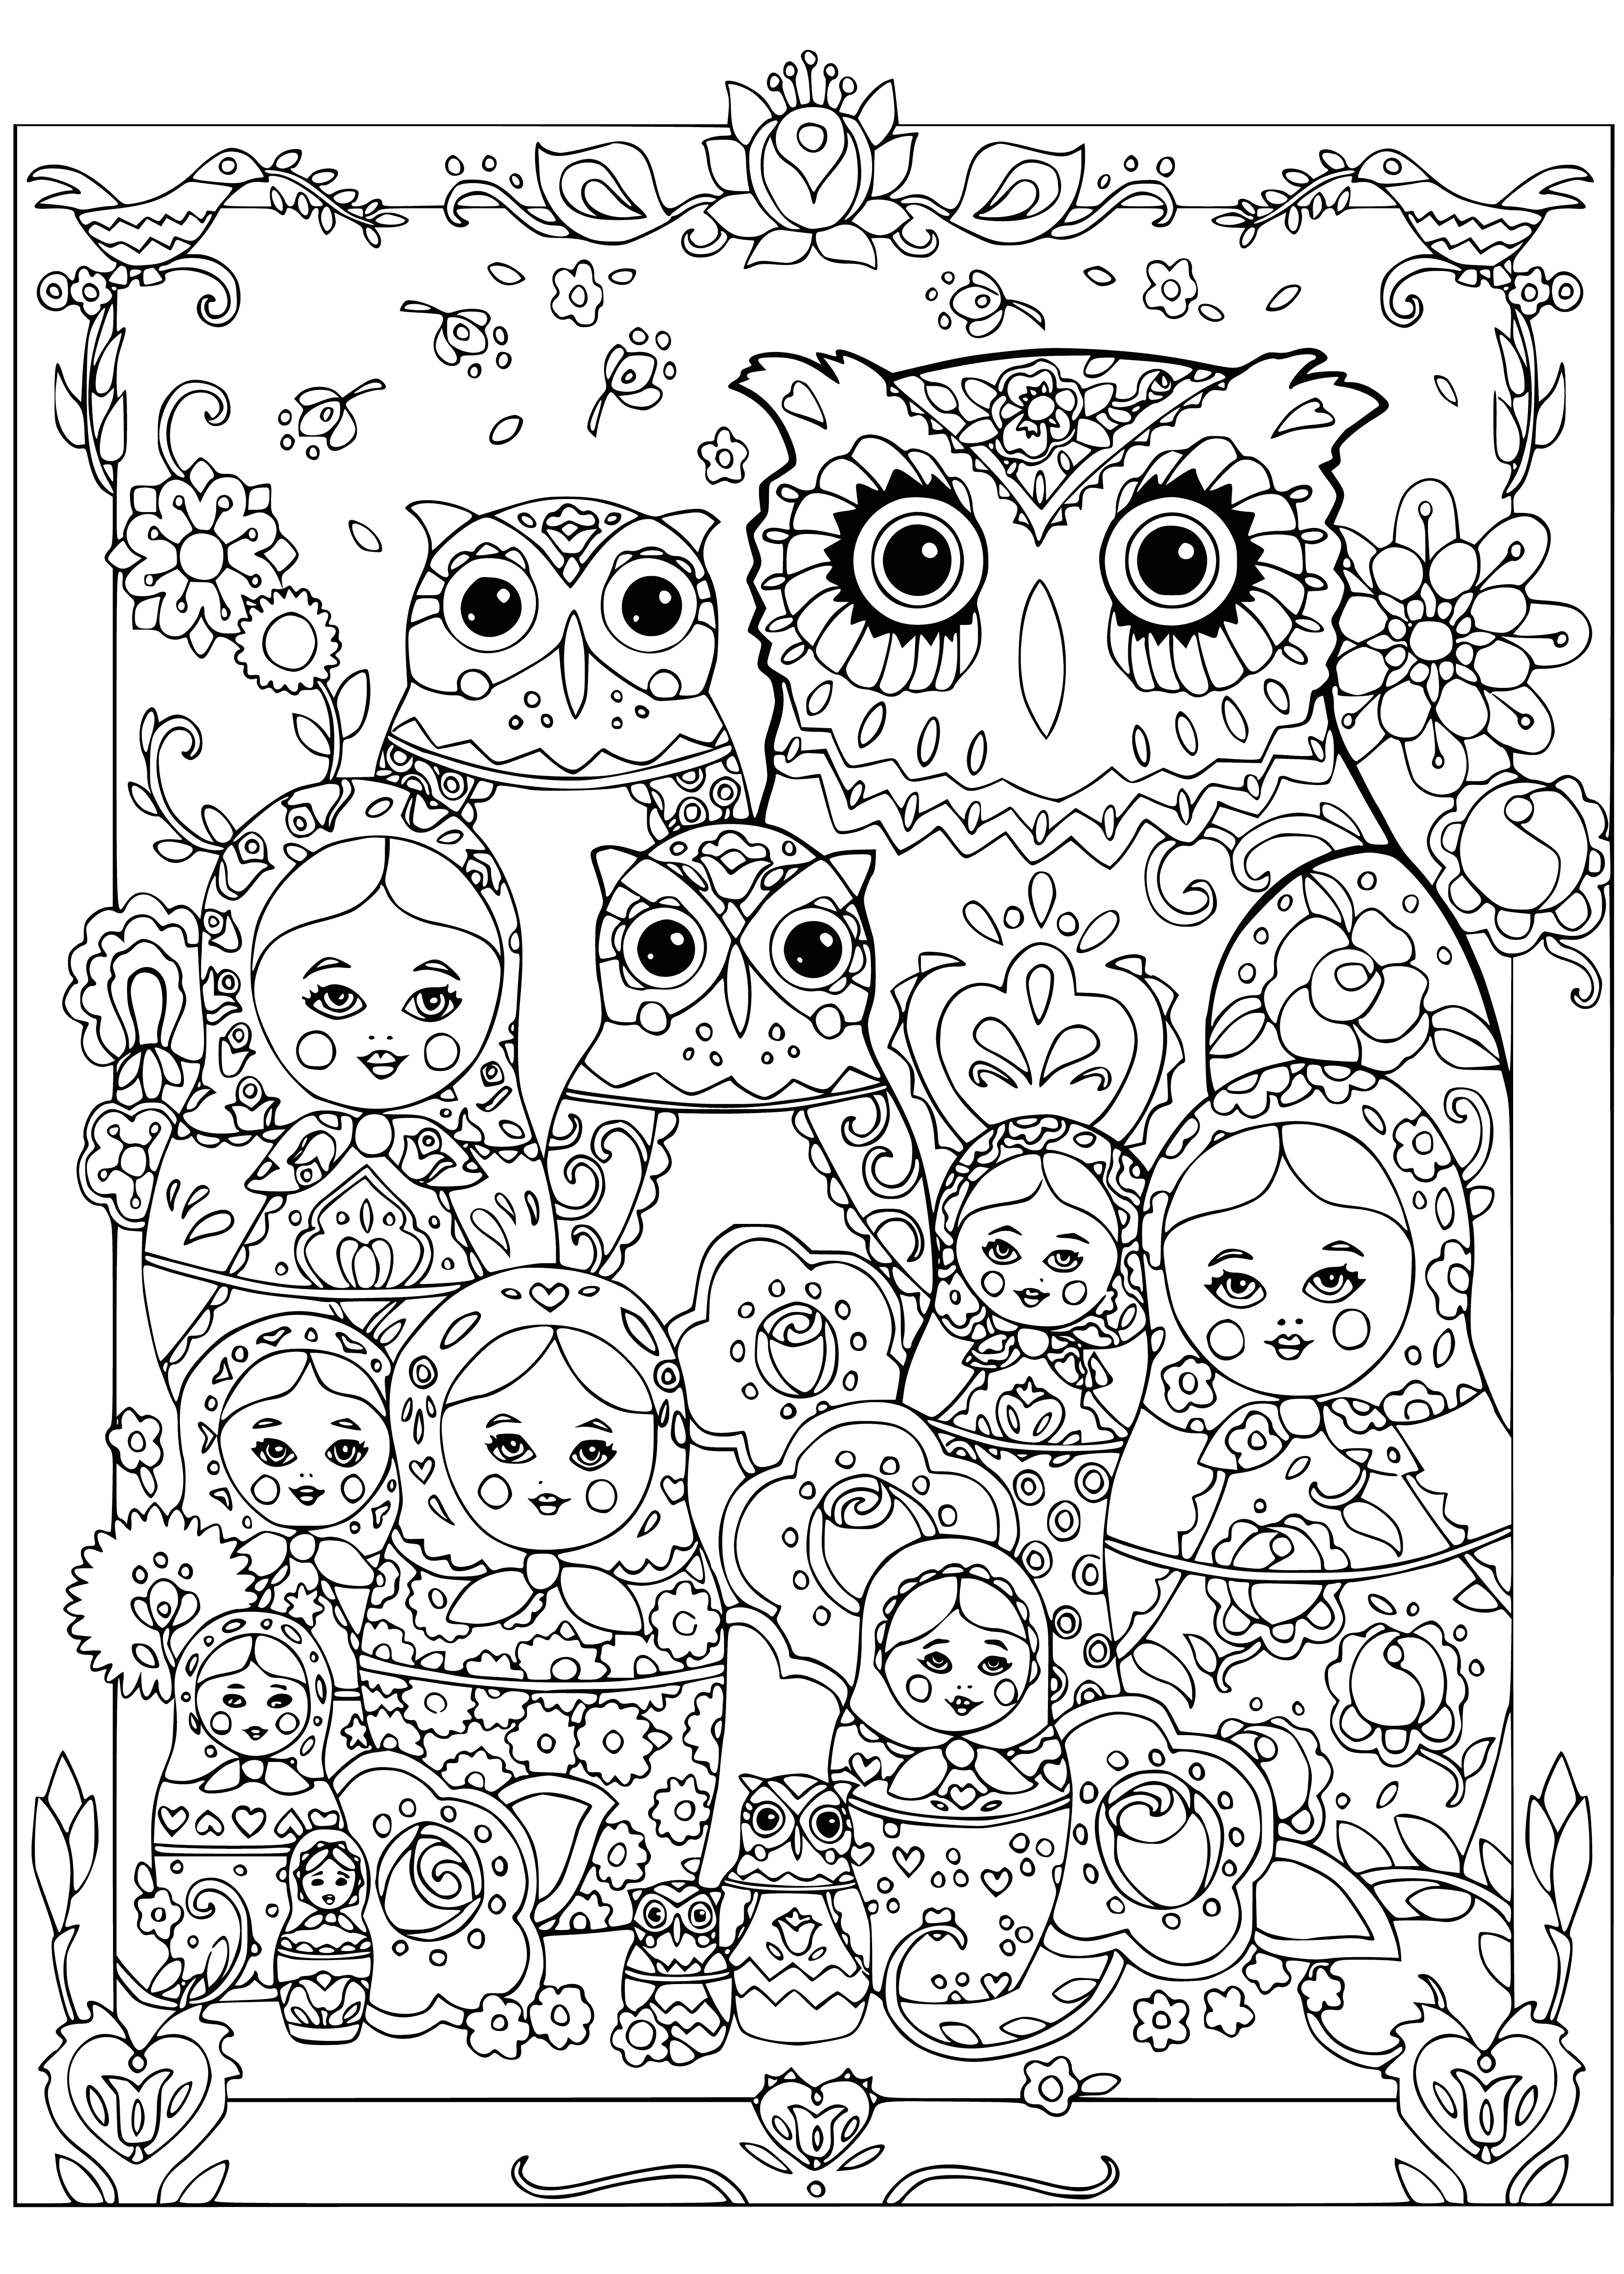 Owls and nesting dolls coloring page